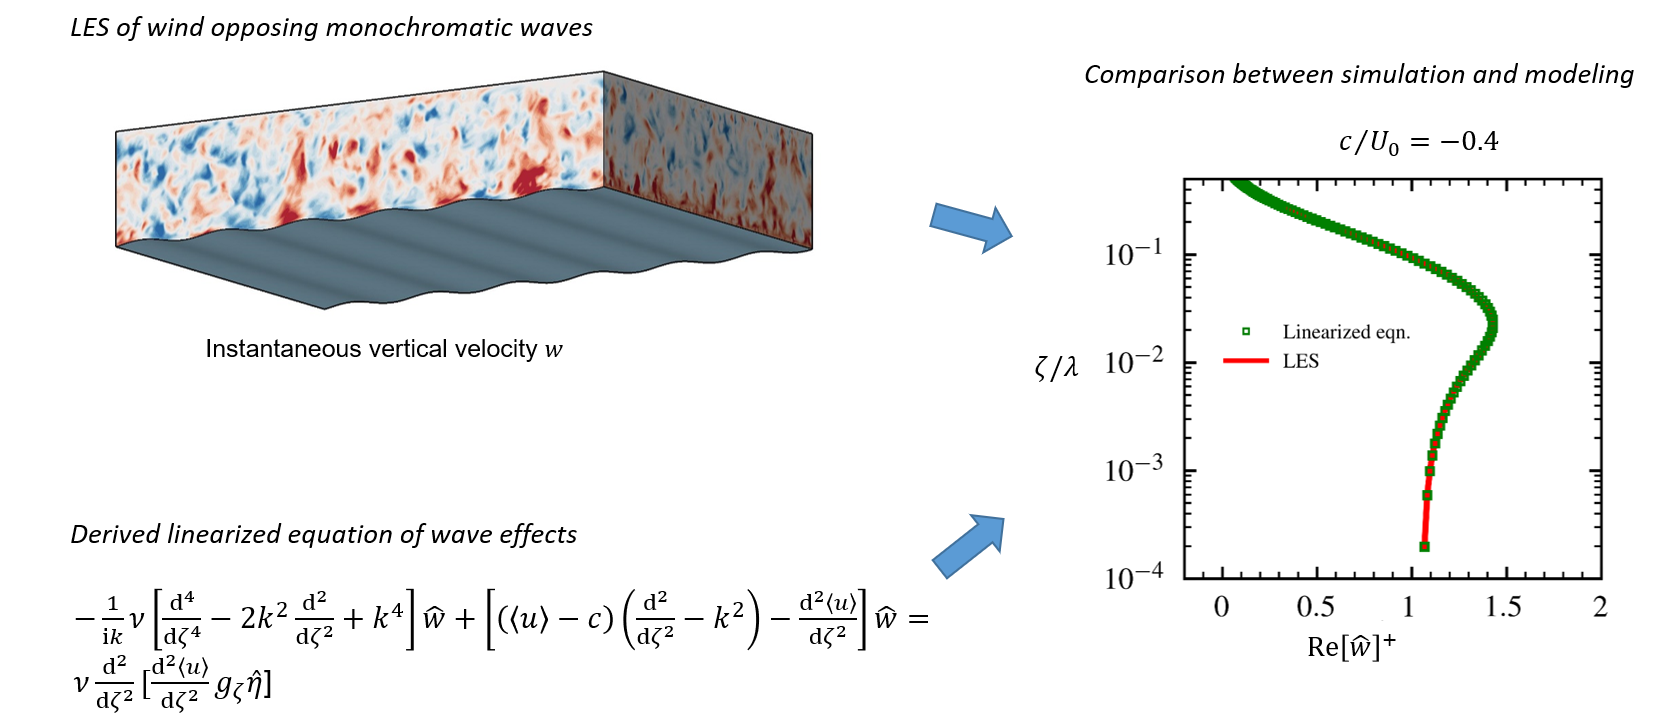 The opposing wave effects on the airflow are modeled analytically.